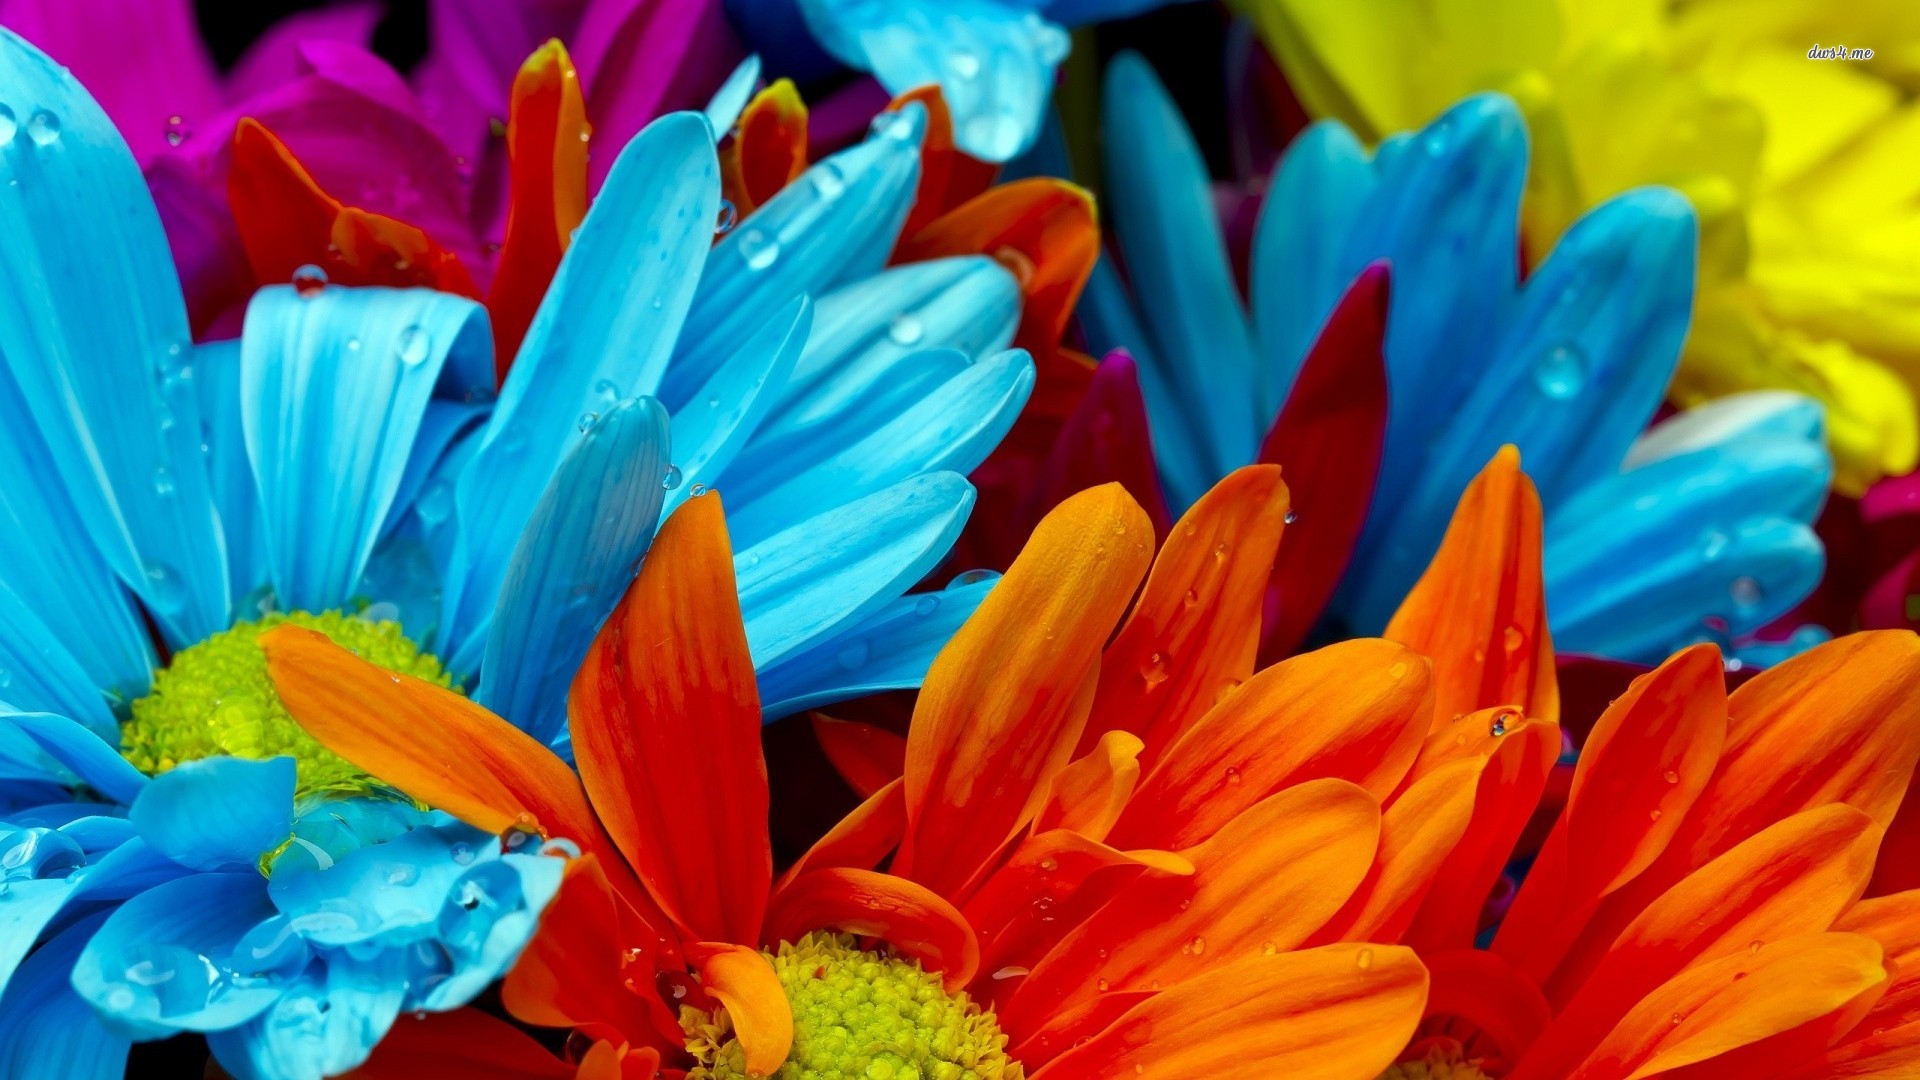 Bright Colored Flowers